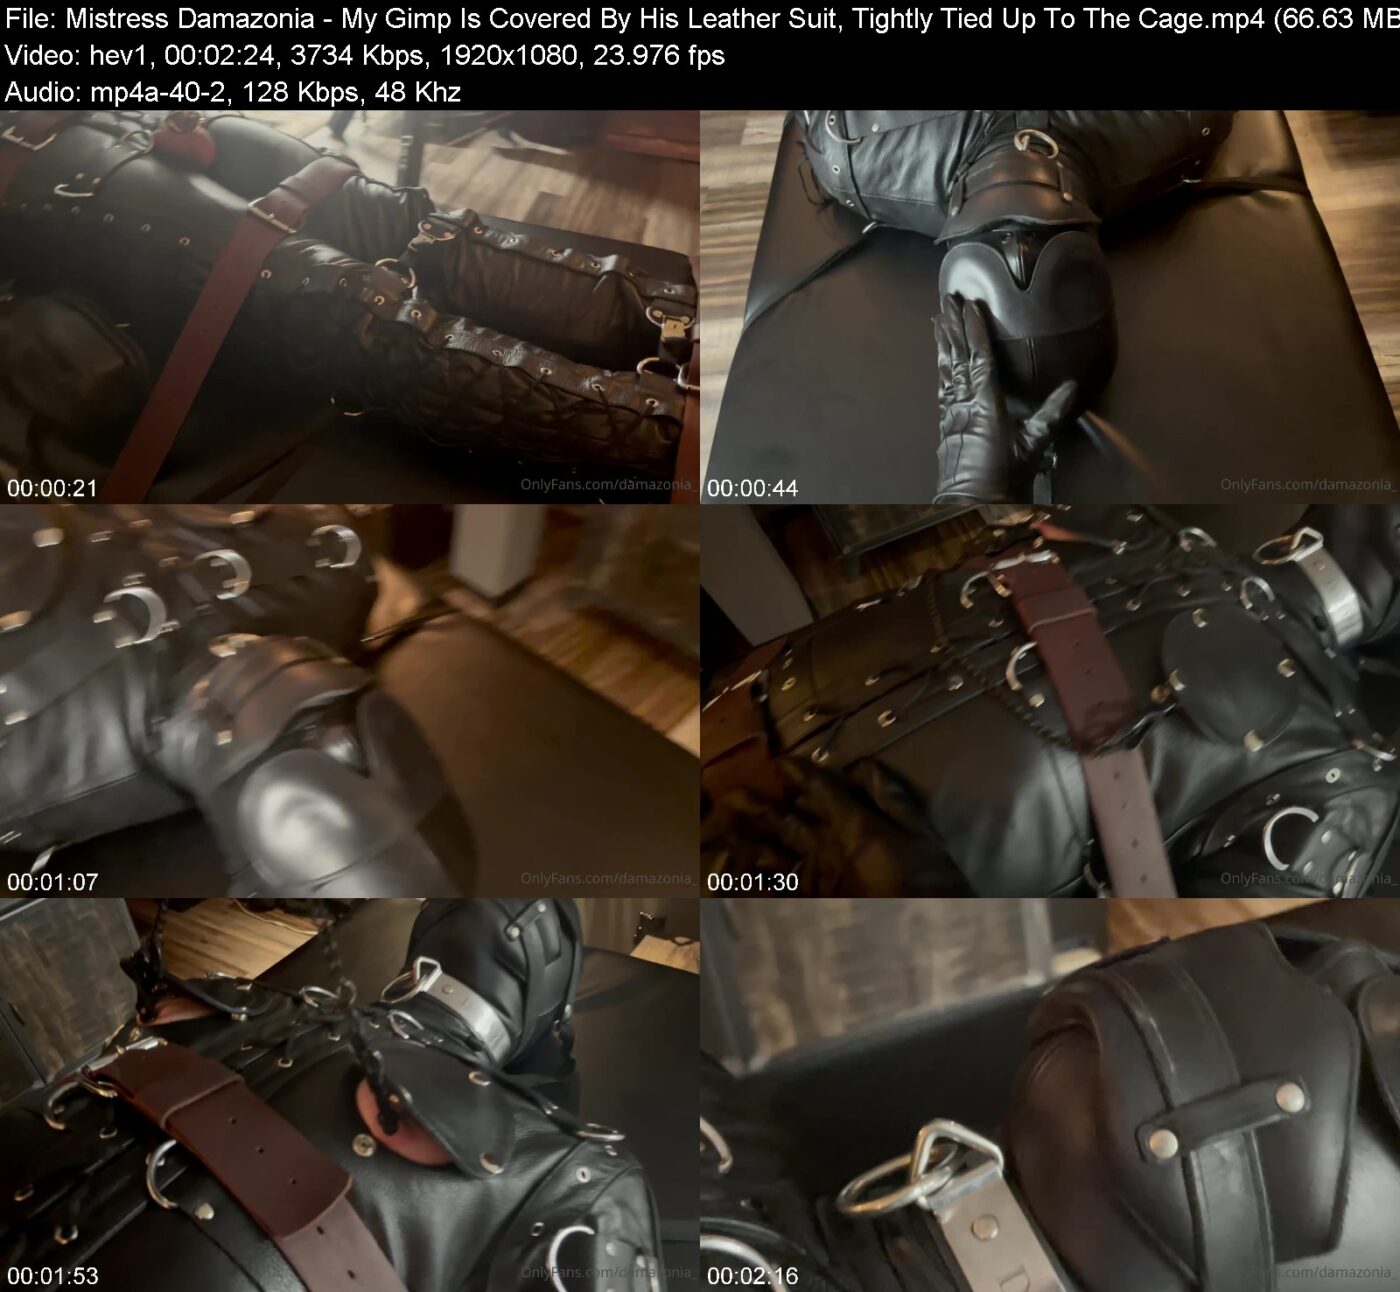 Mistress Damazonia in My Gimp Is Covered By His Leather Suit, Tightly Tied Up To The Cage